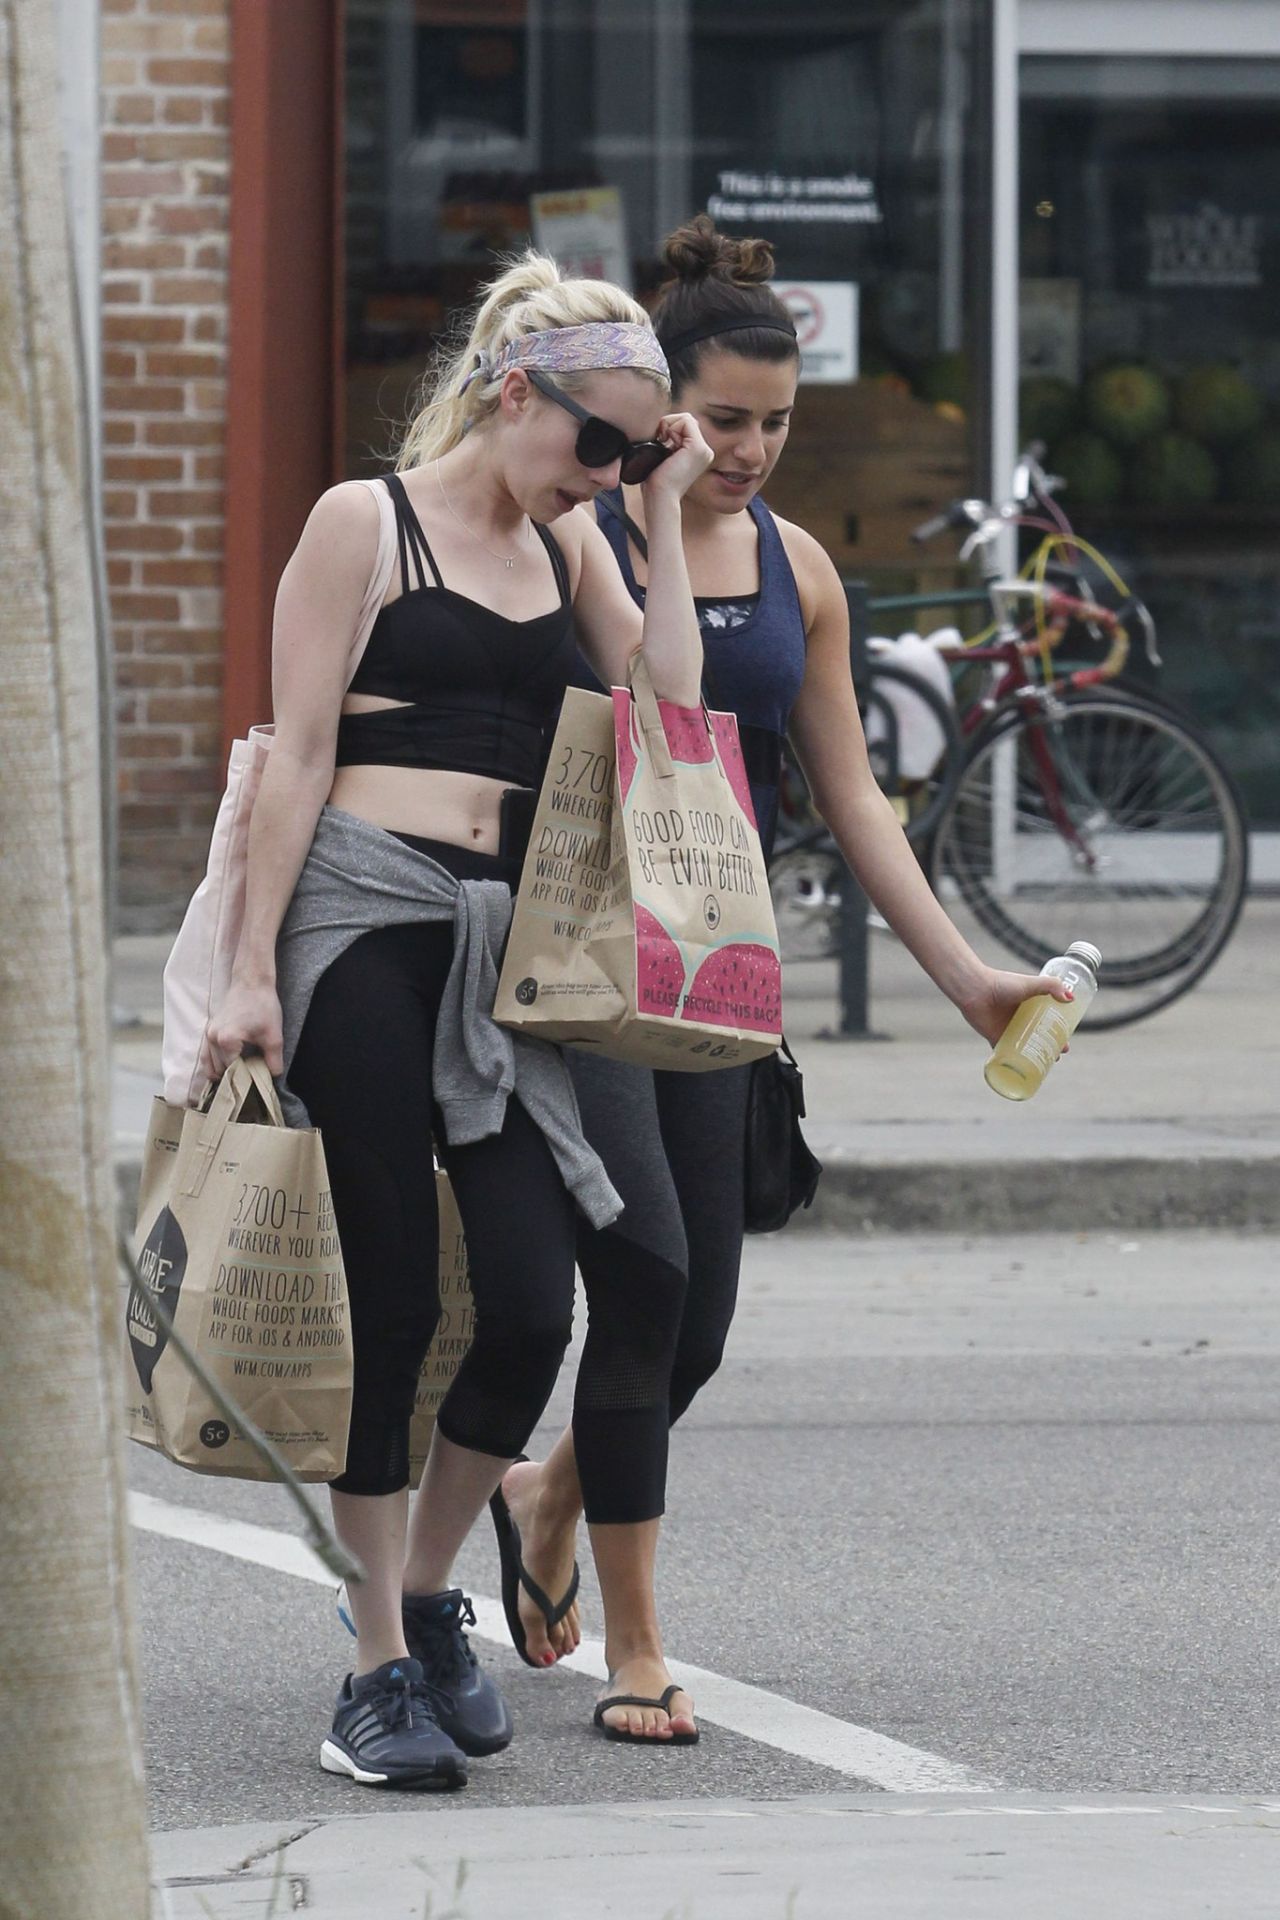 http://celebmafia.com/wp-content/uploads/2015/09/emma-roberts-and-lea-michele-shopping-at-whole-foods-in-new-orleans-september-2015_6.jpg